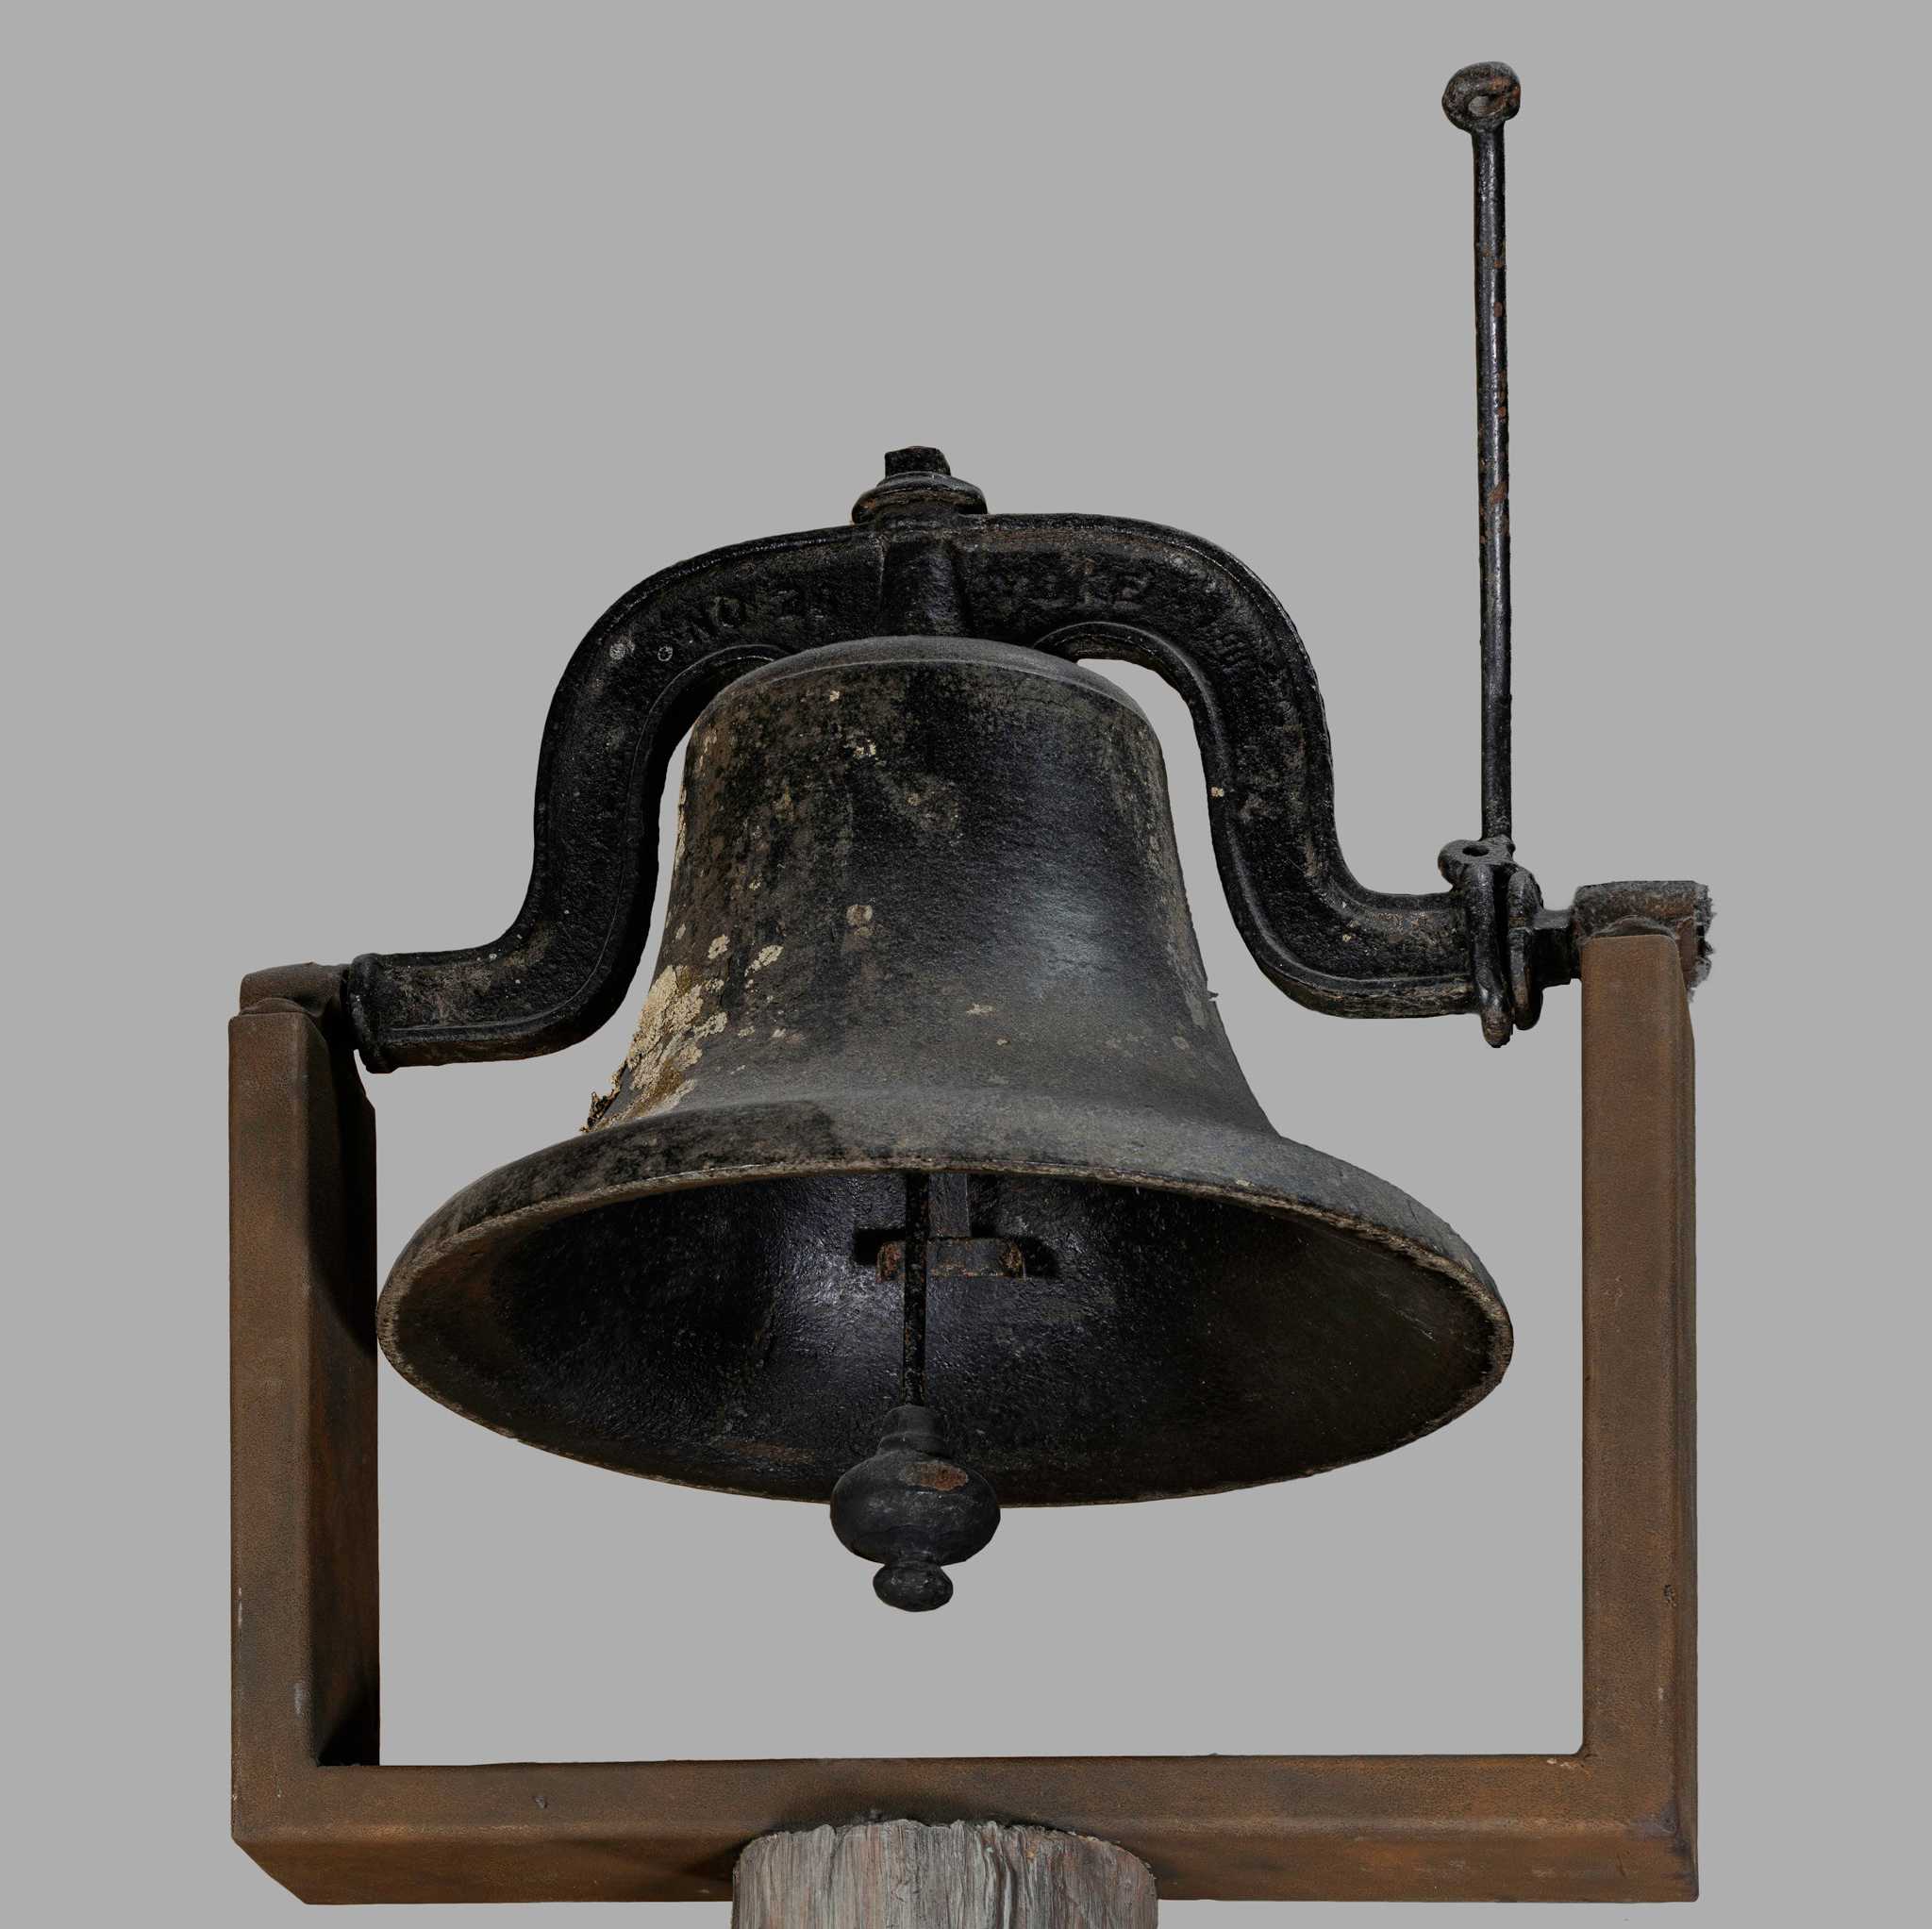 Photograph of the Magnolia Plantation Bell